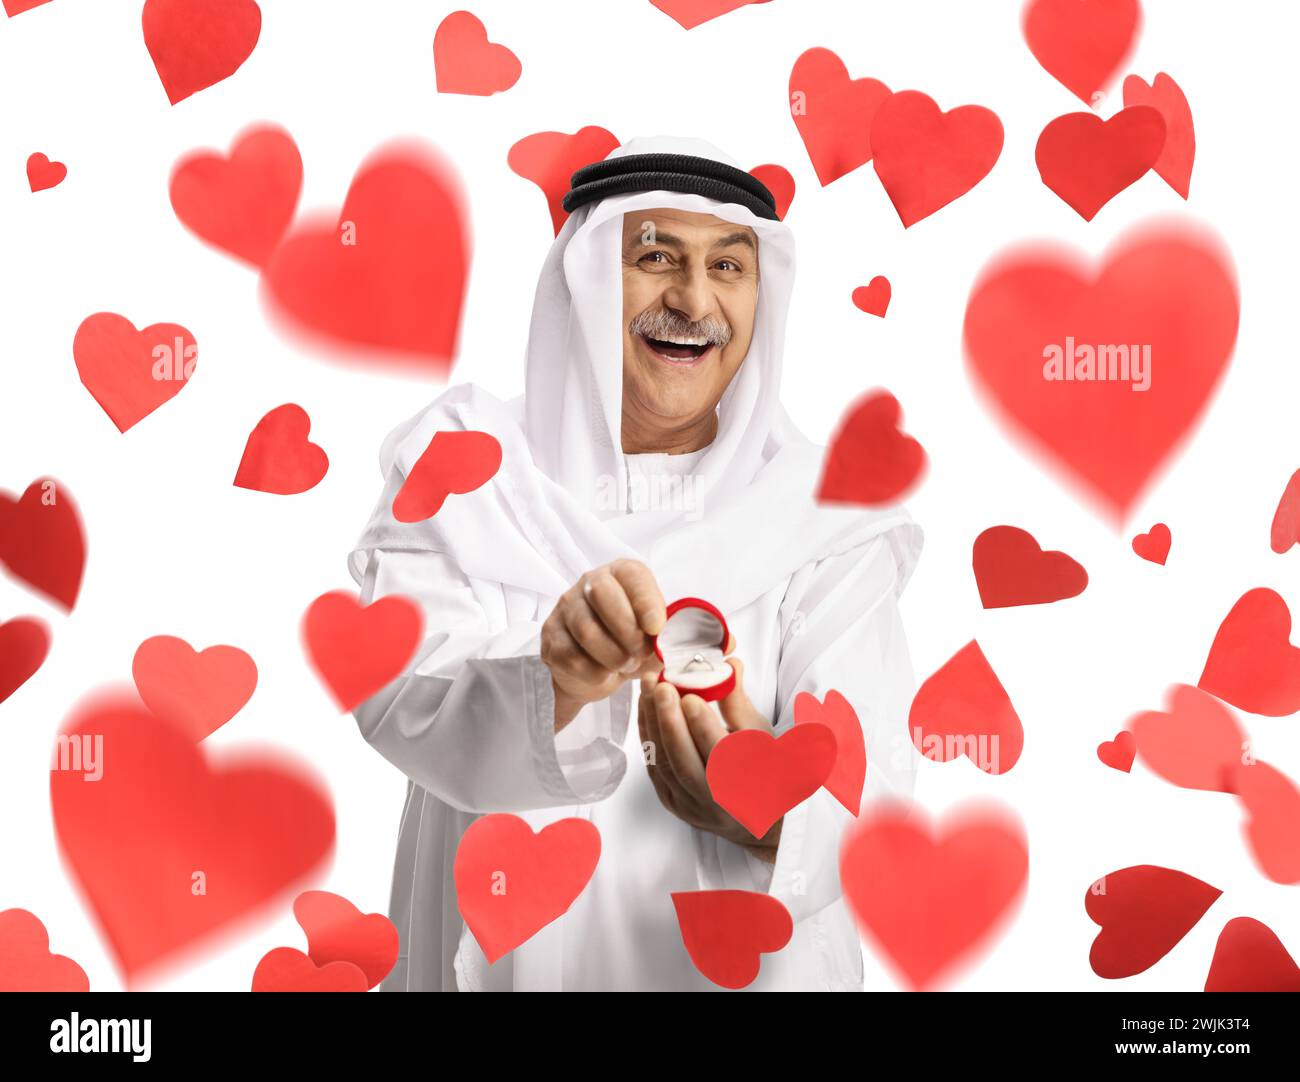 Smiling arab man holding an engagement ring in a box under falling hearts Stock Photo